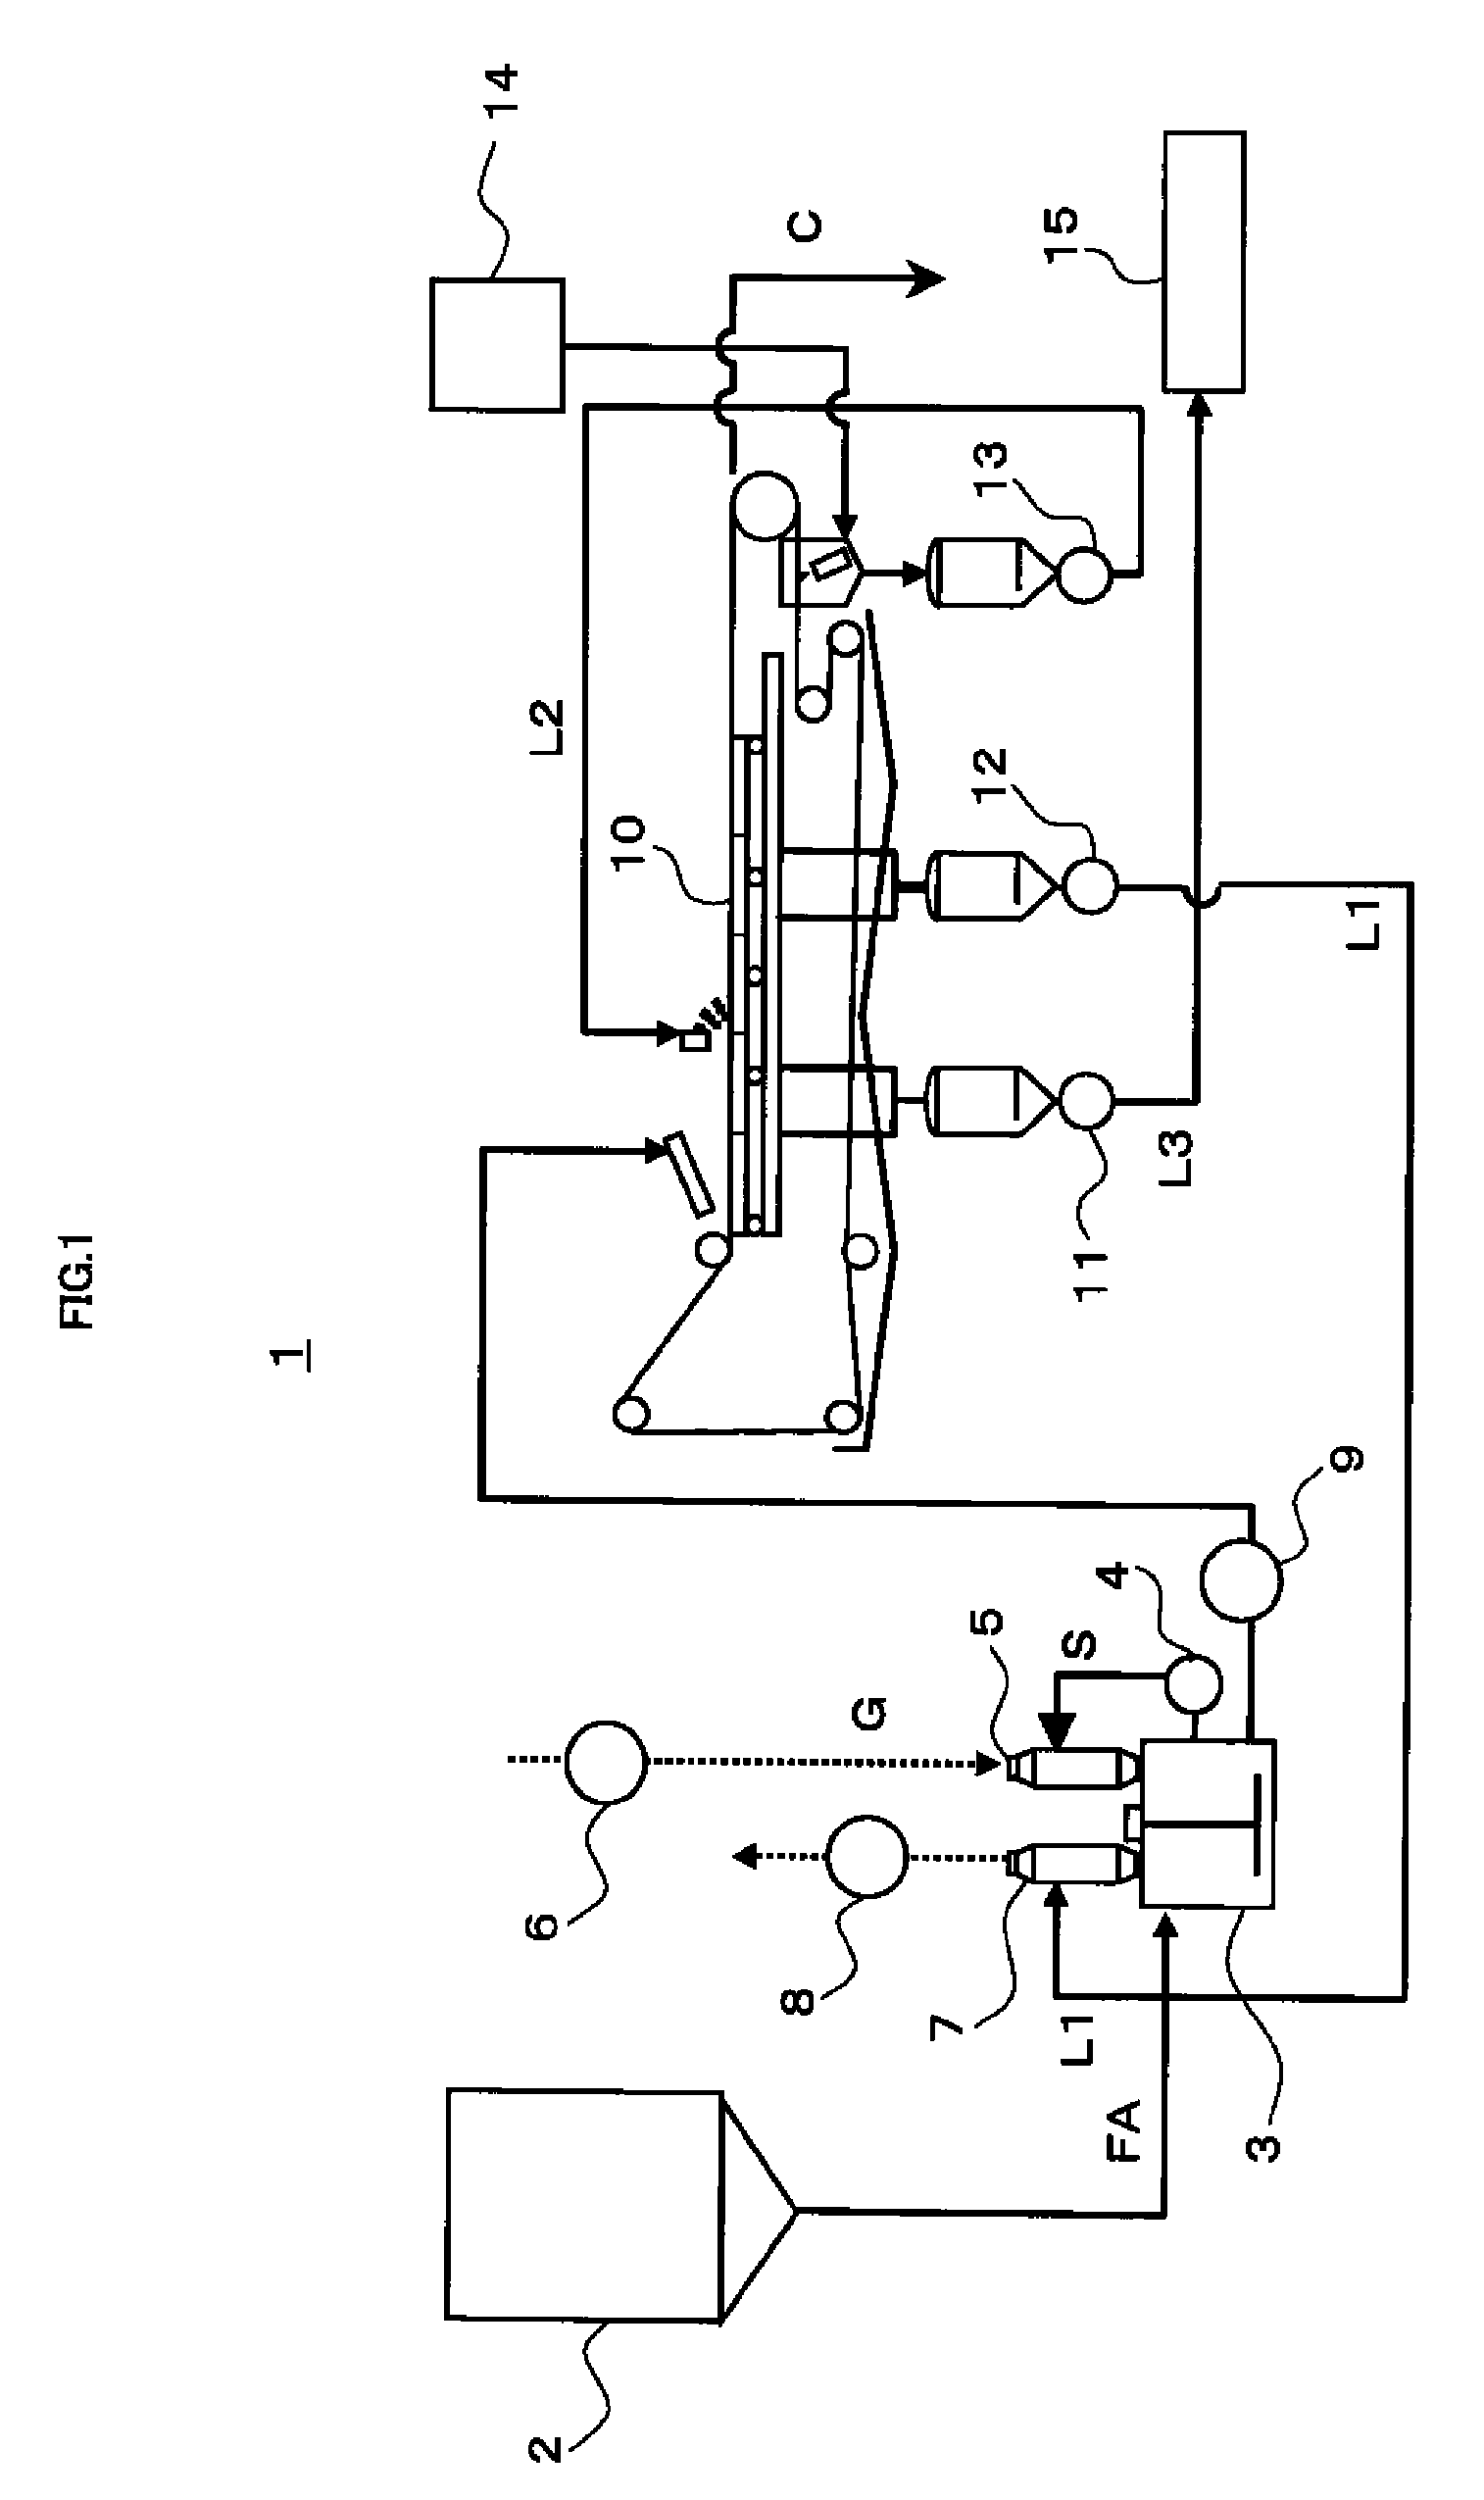 Apparatus and method for dissolution reaction